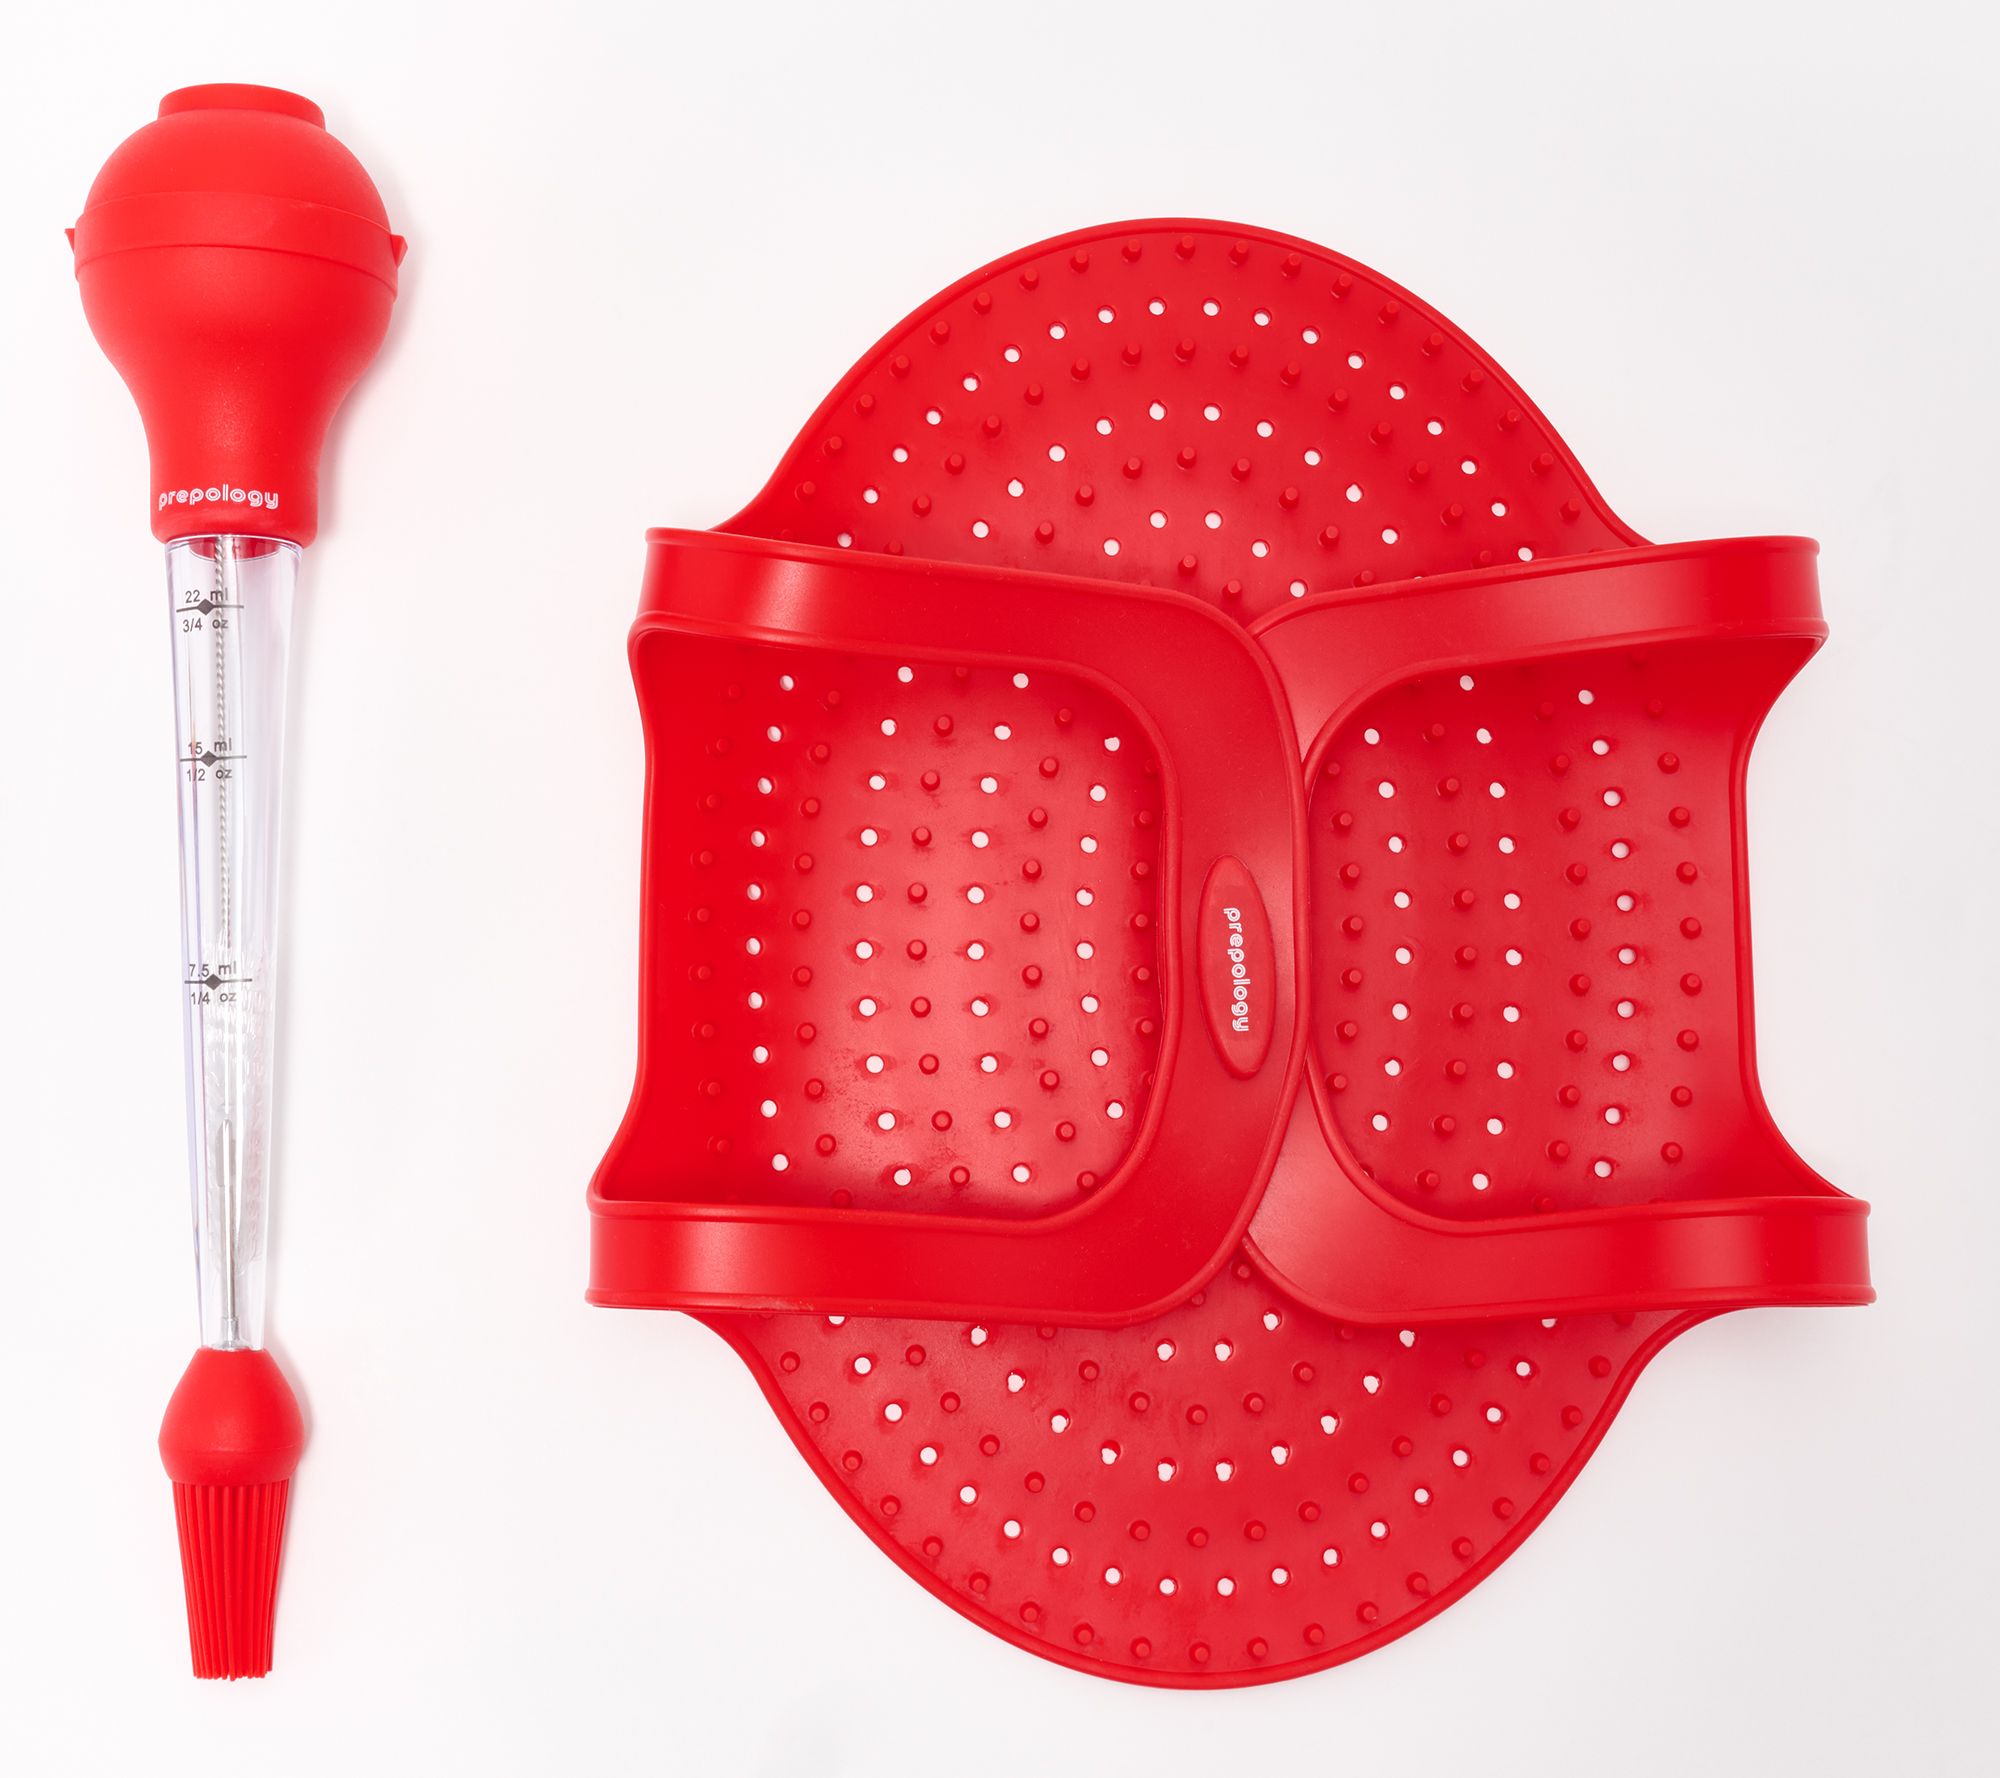 Prepology Hand-Held Slicer with 4 Interchangable Slicing Blades 